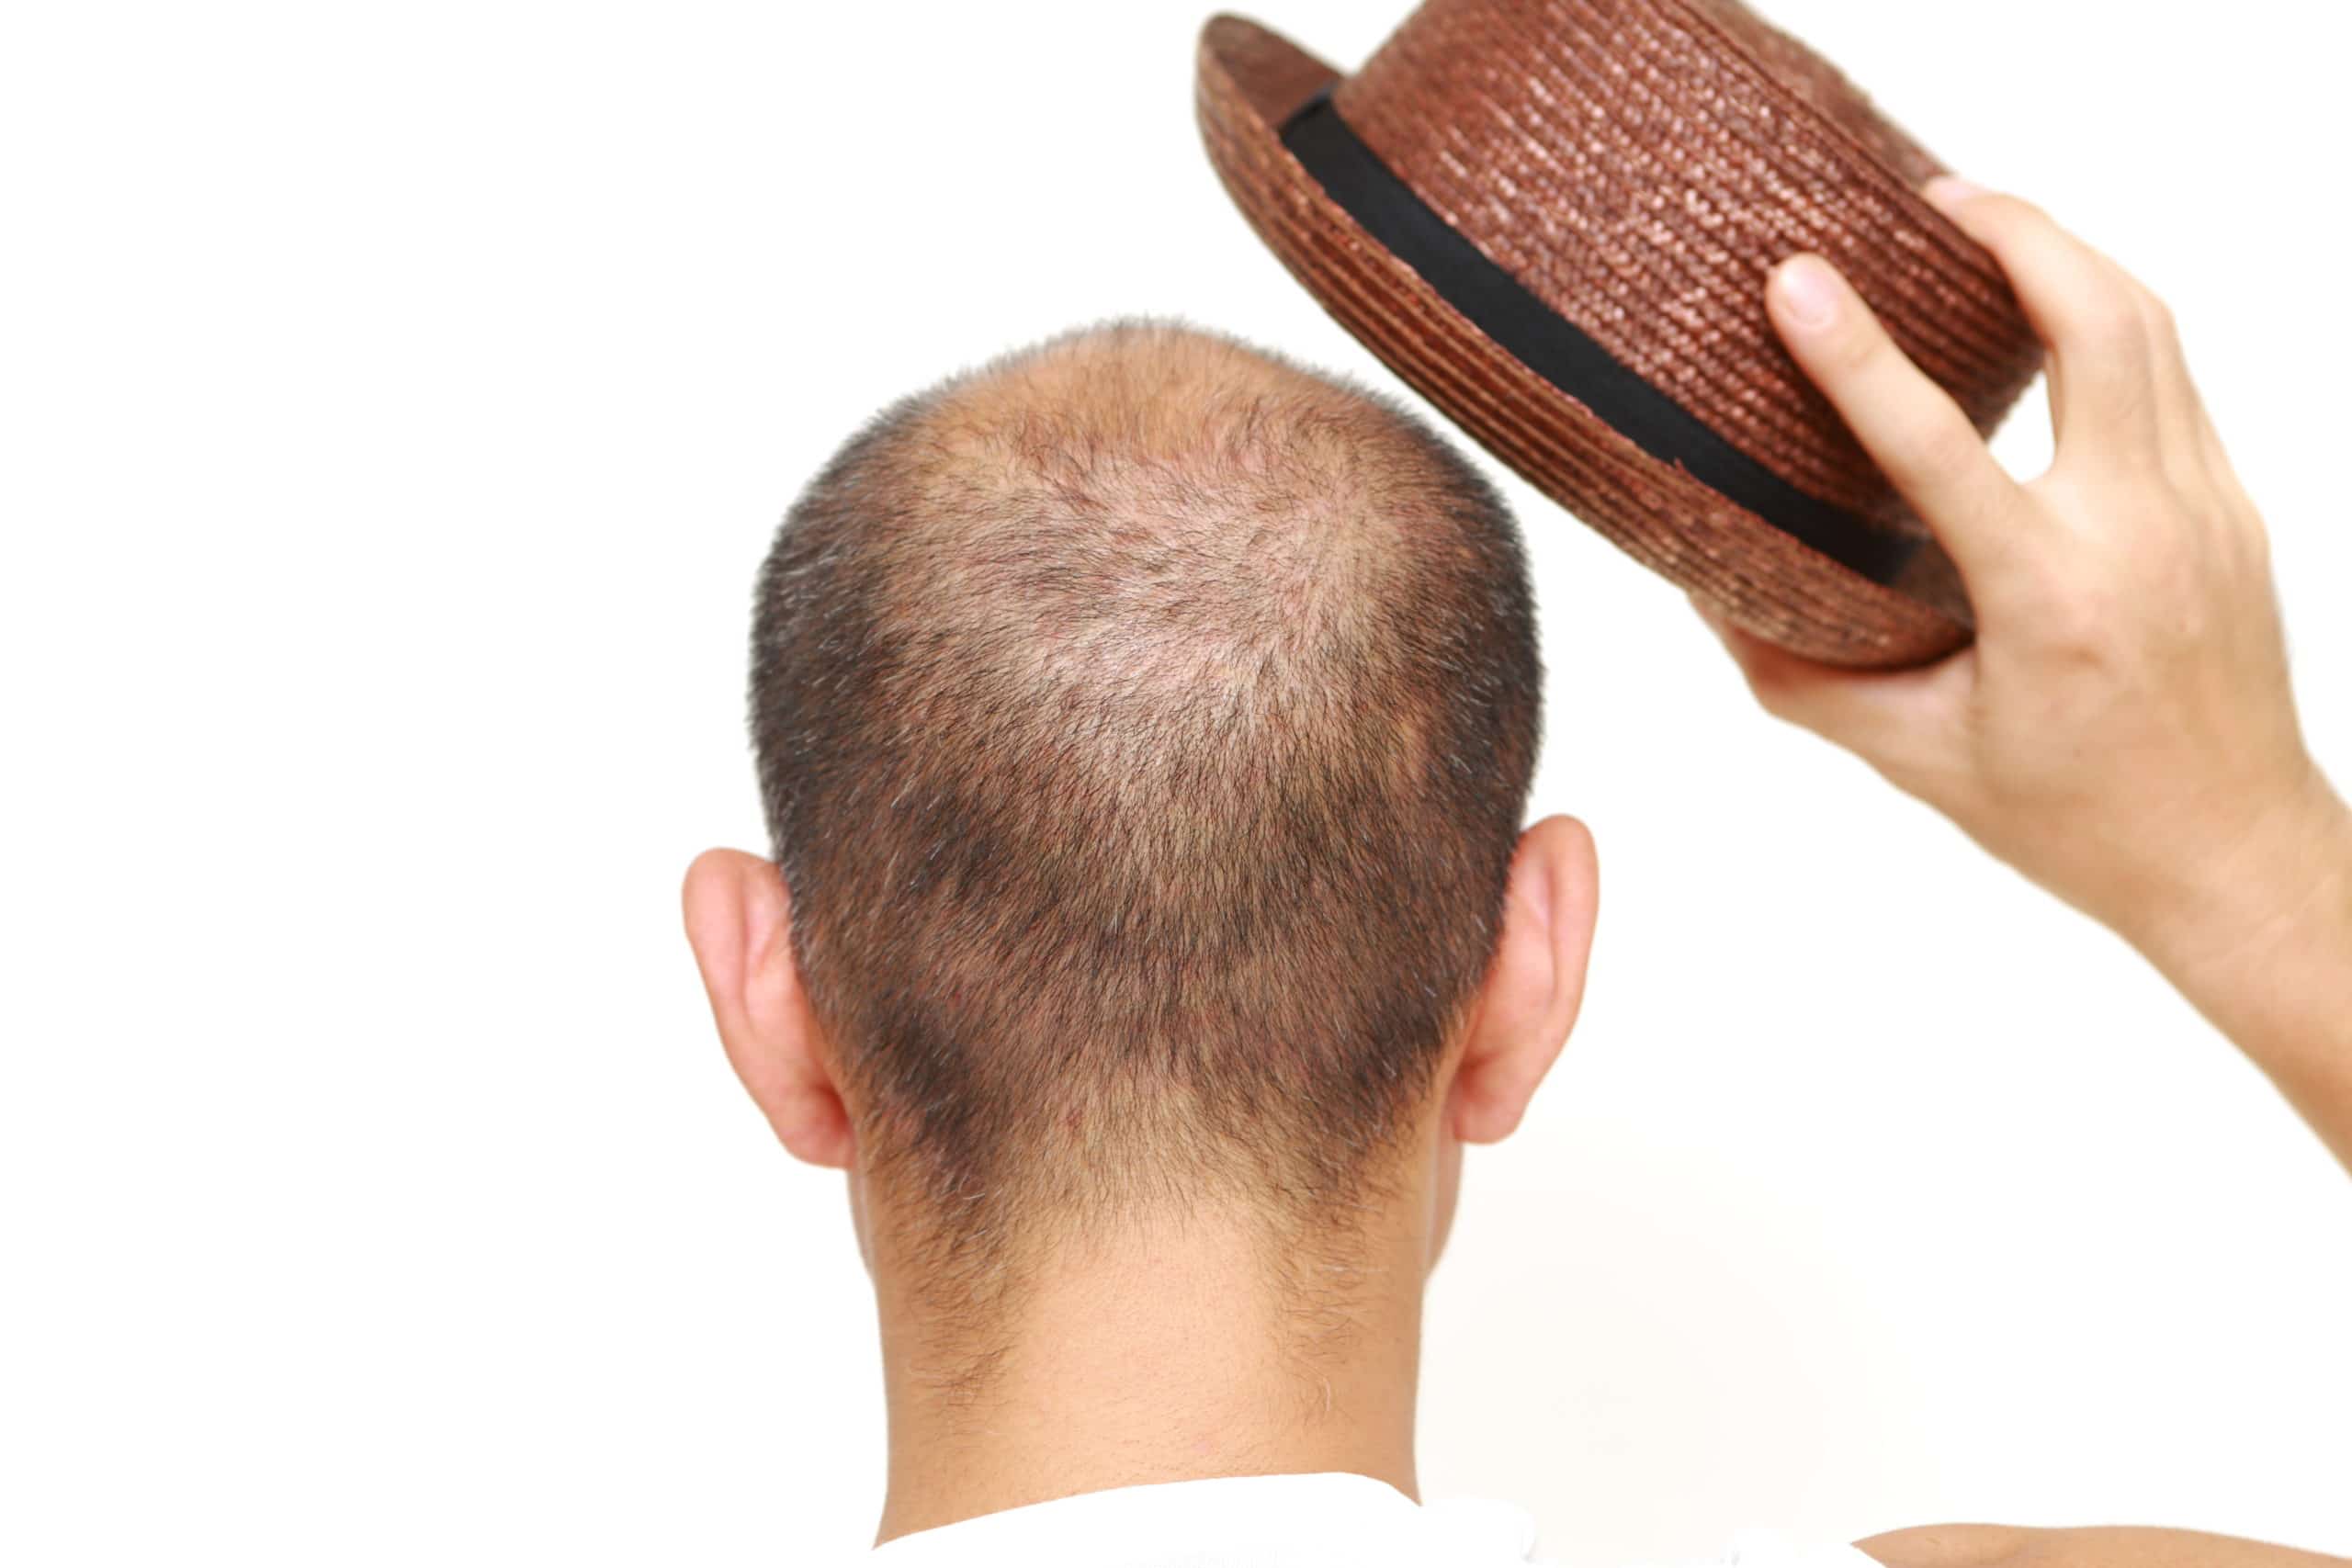 Is it Conceivable that Wearing a Cap Might Cause Hair Loss?